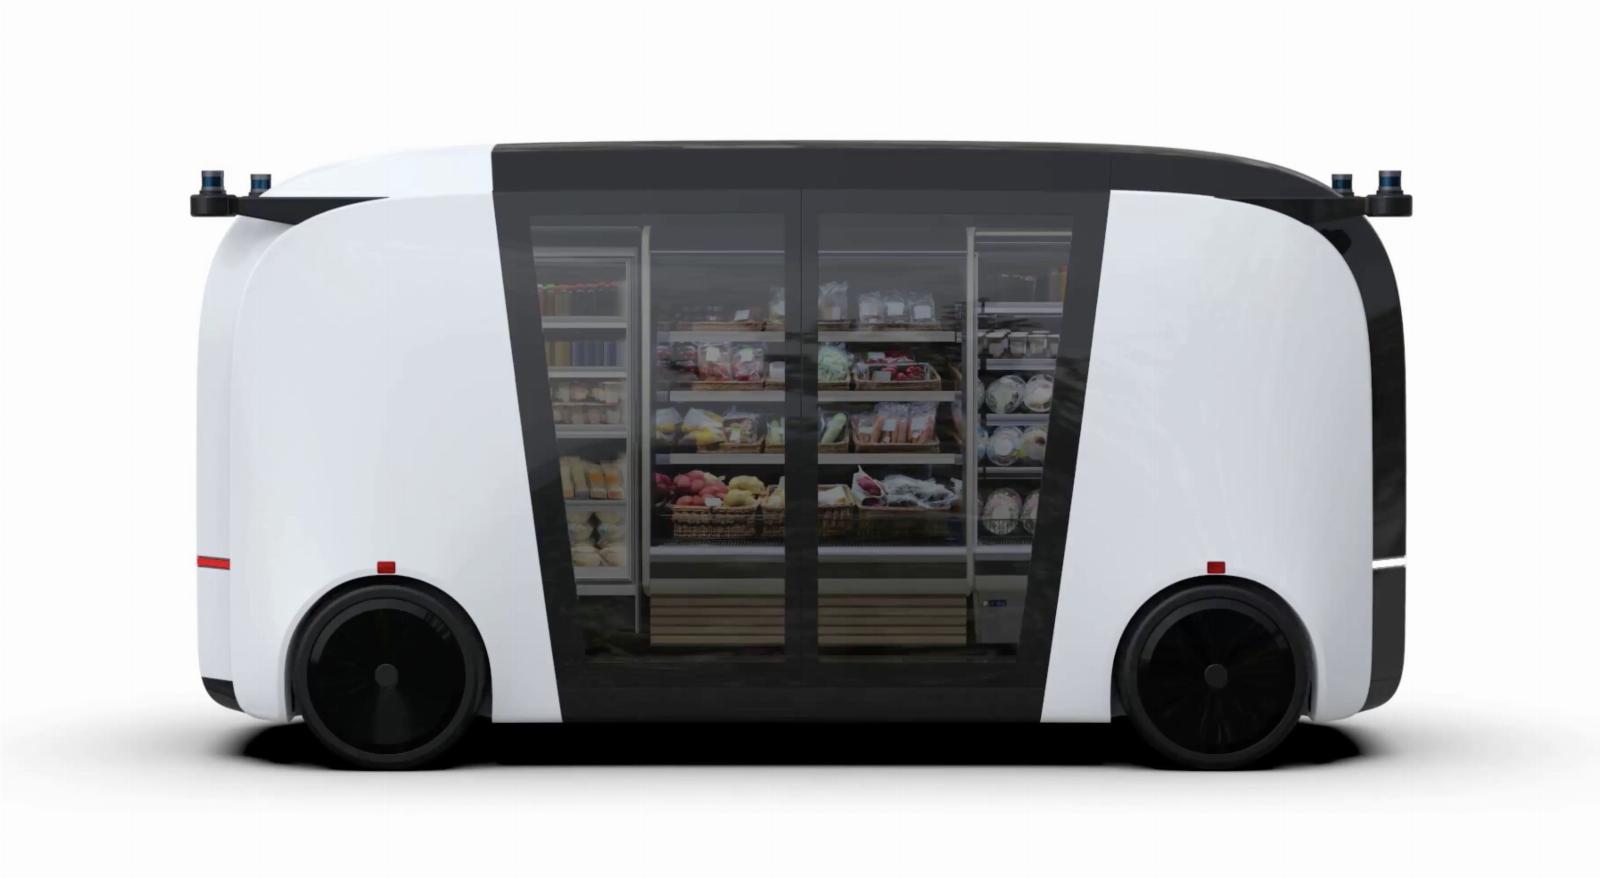 Robomart is banking on ‘store-hailing’ to bring self-driving stores directly to customers